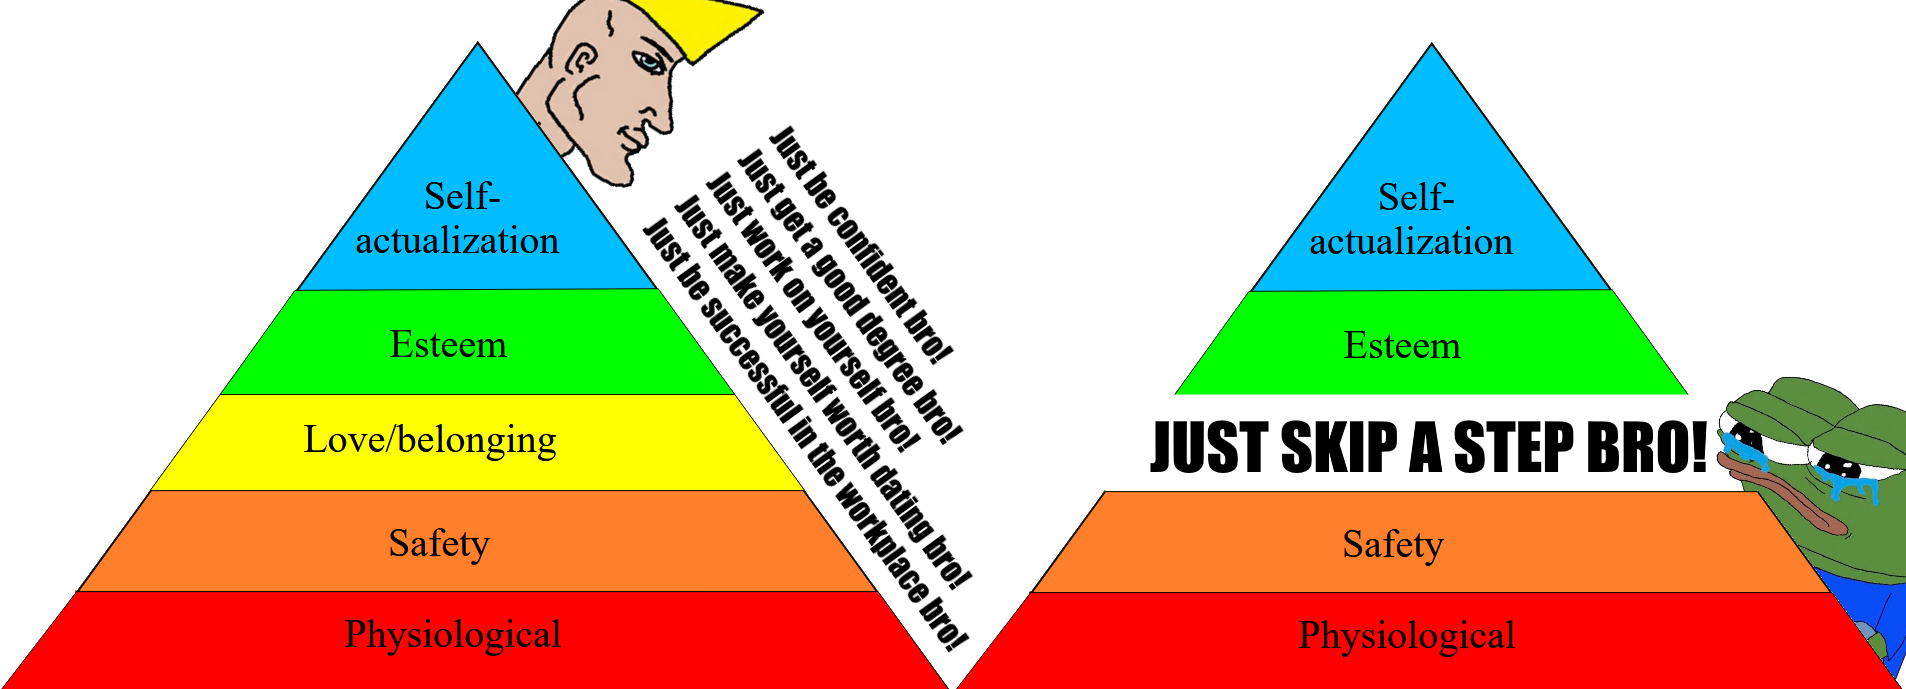 Hierarchy_of_needs2.png